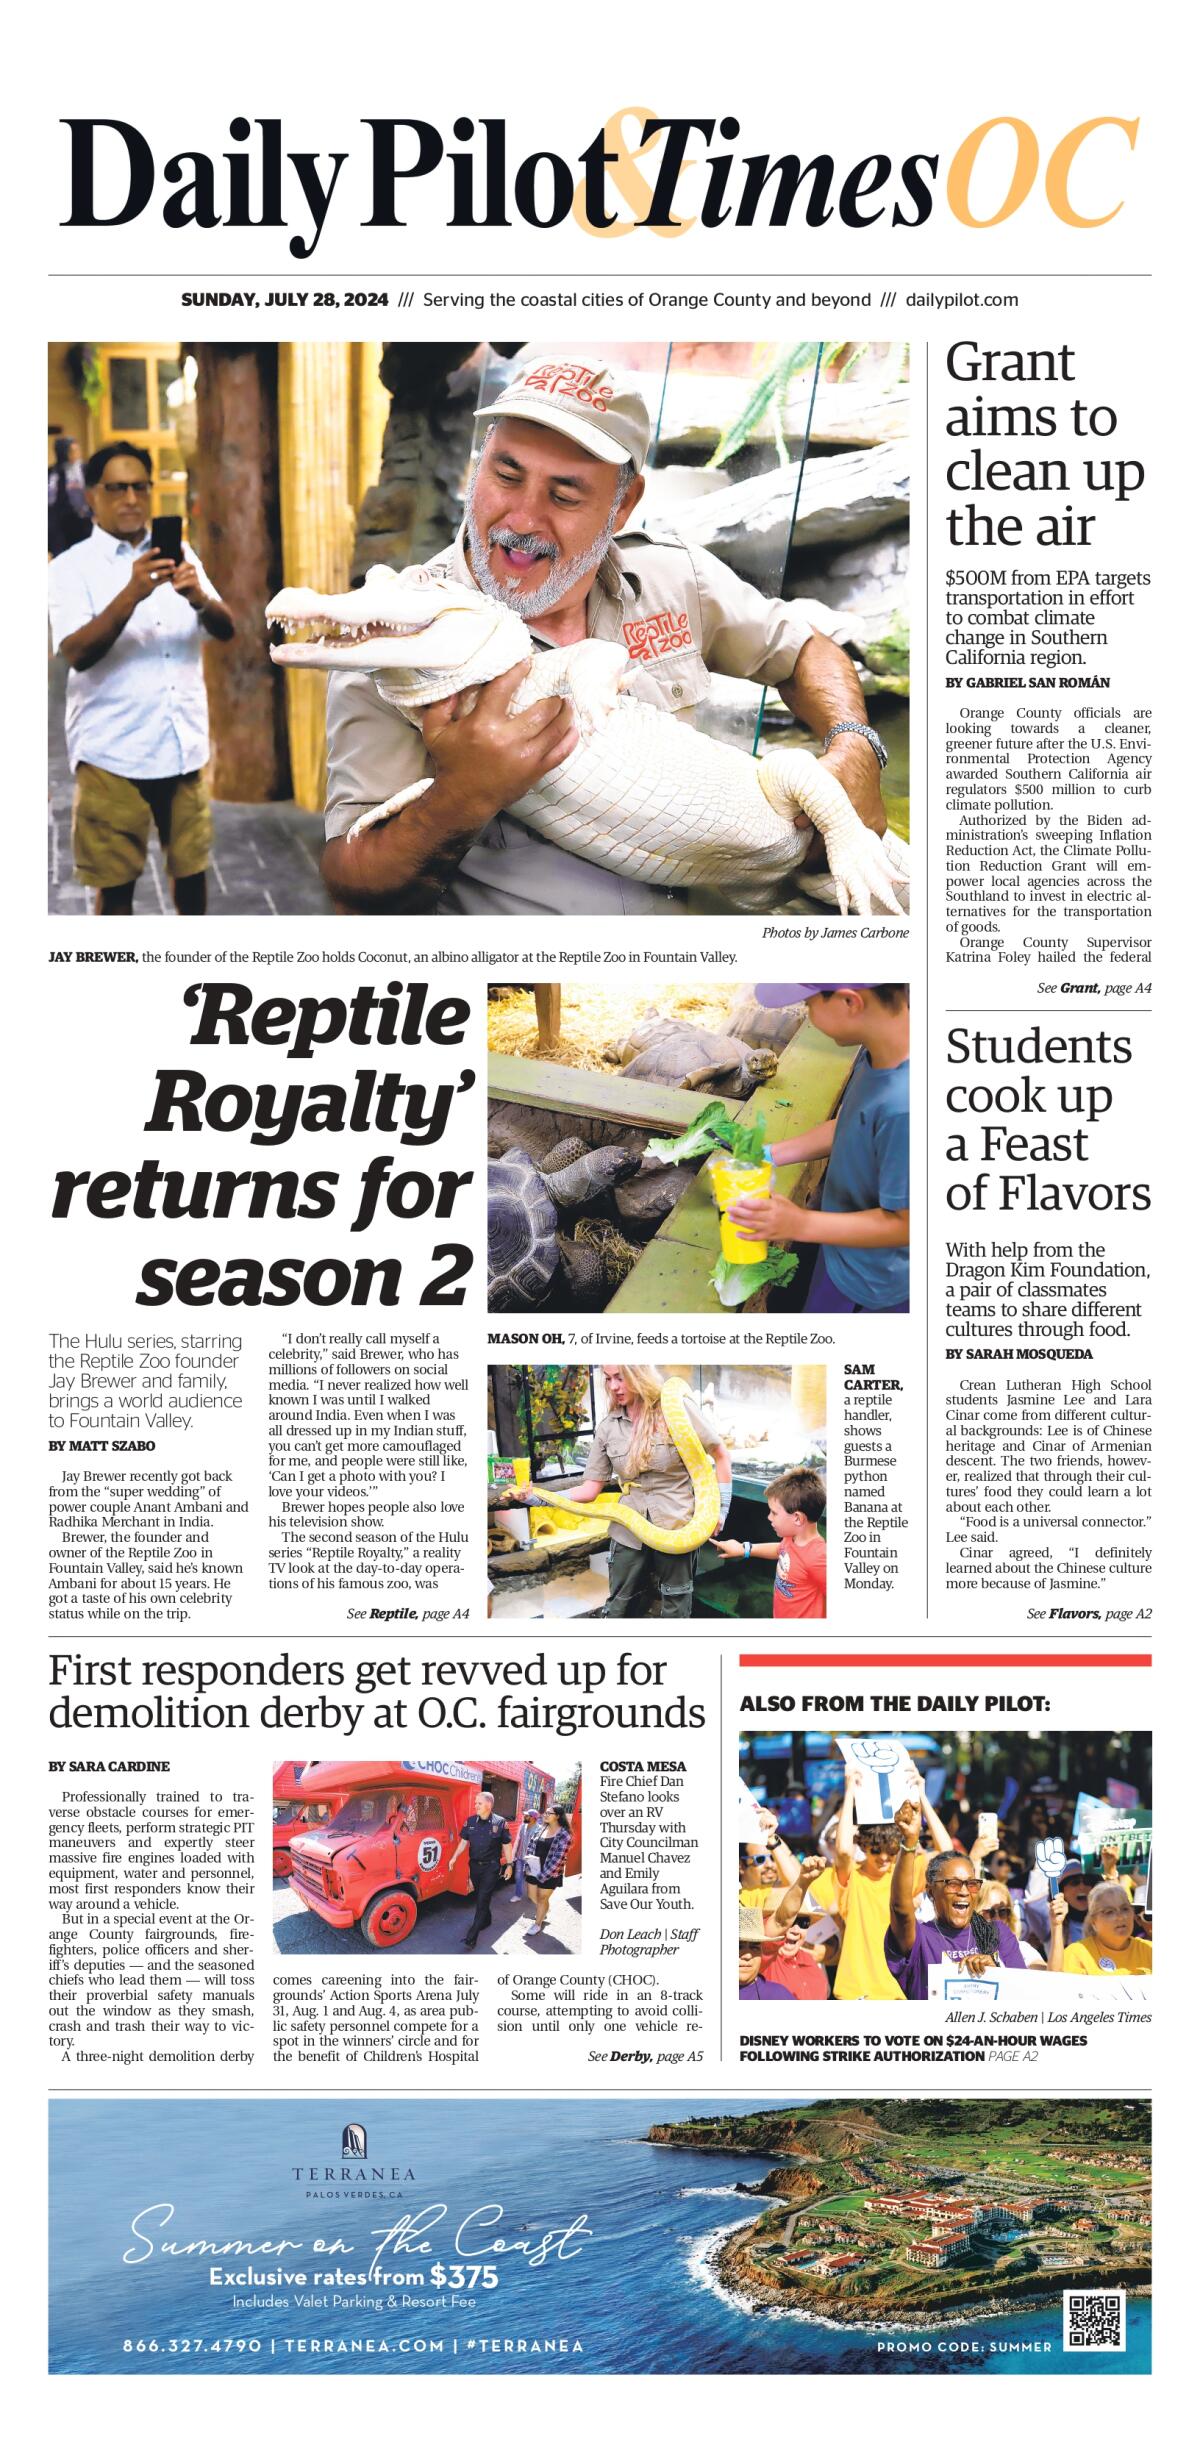 Front page of the Daily Pilot & TimesOC e-newspaper for Sunday, July 28, 2024.